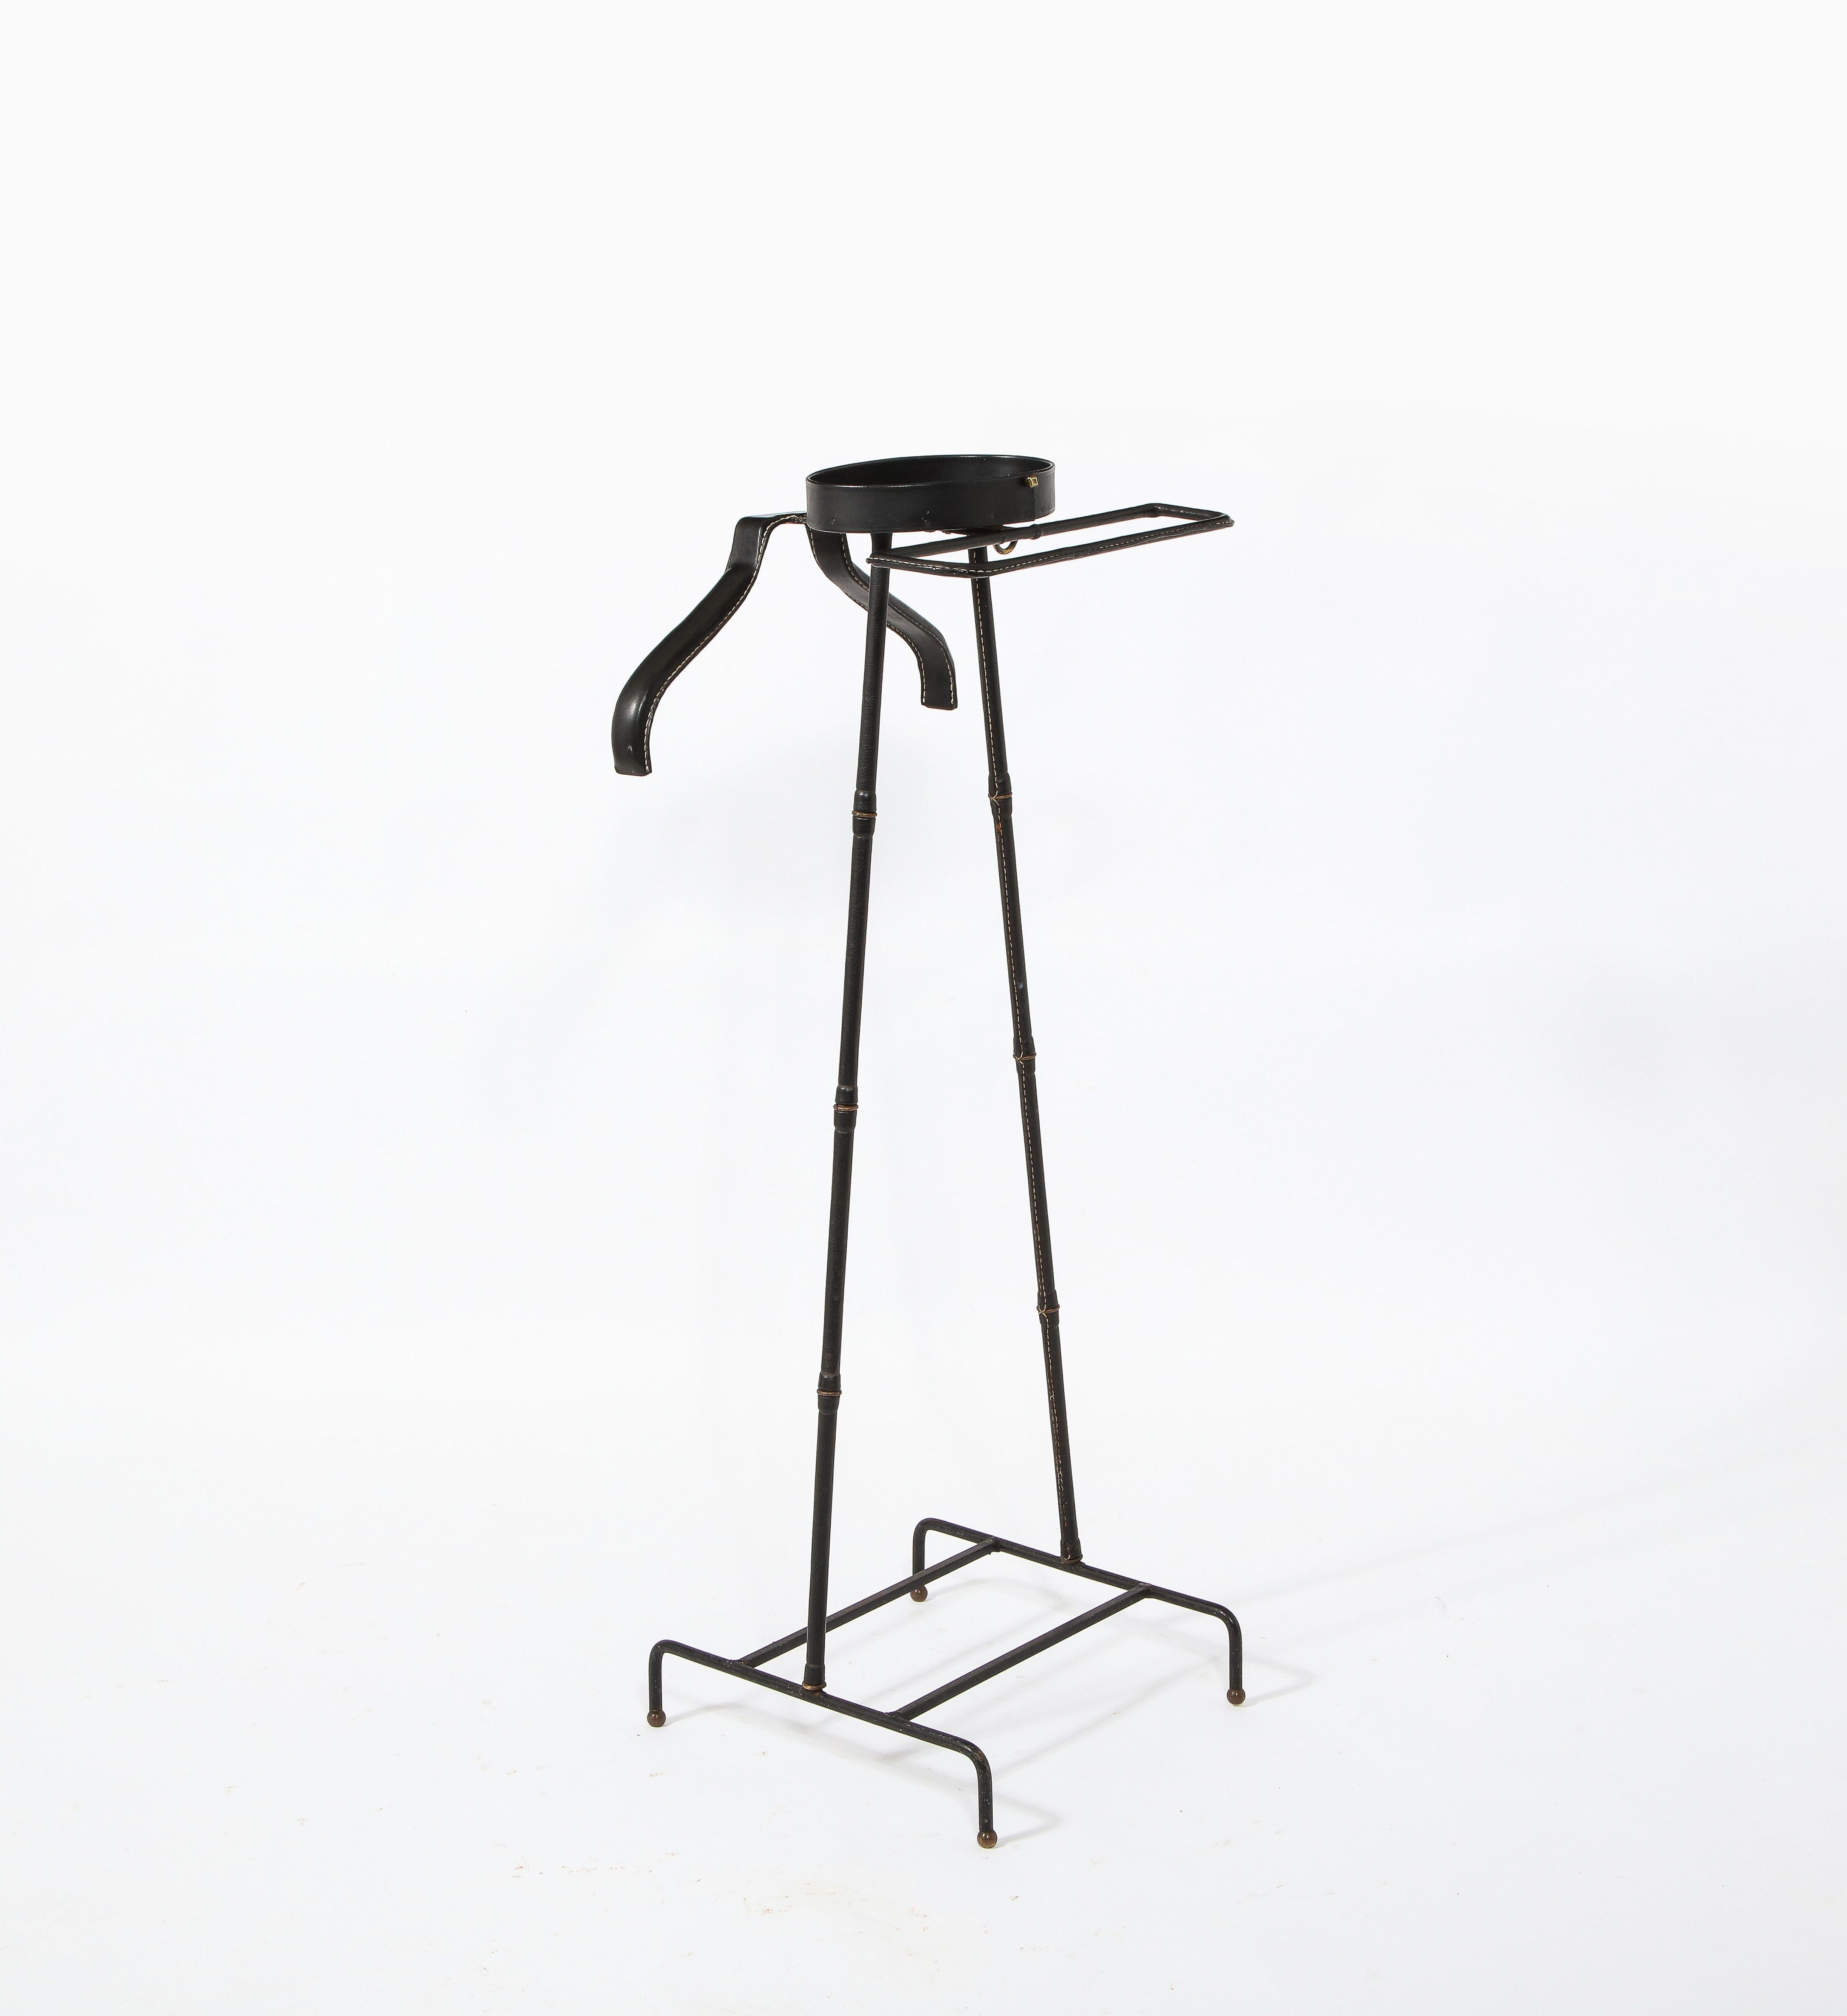 French Stitched Leather Valet Stand by Jacques Adnet, France 1960's